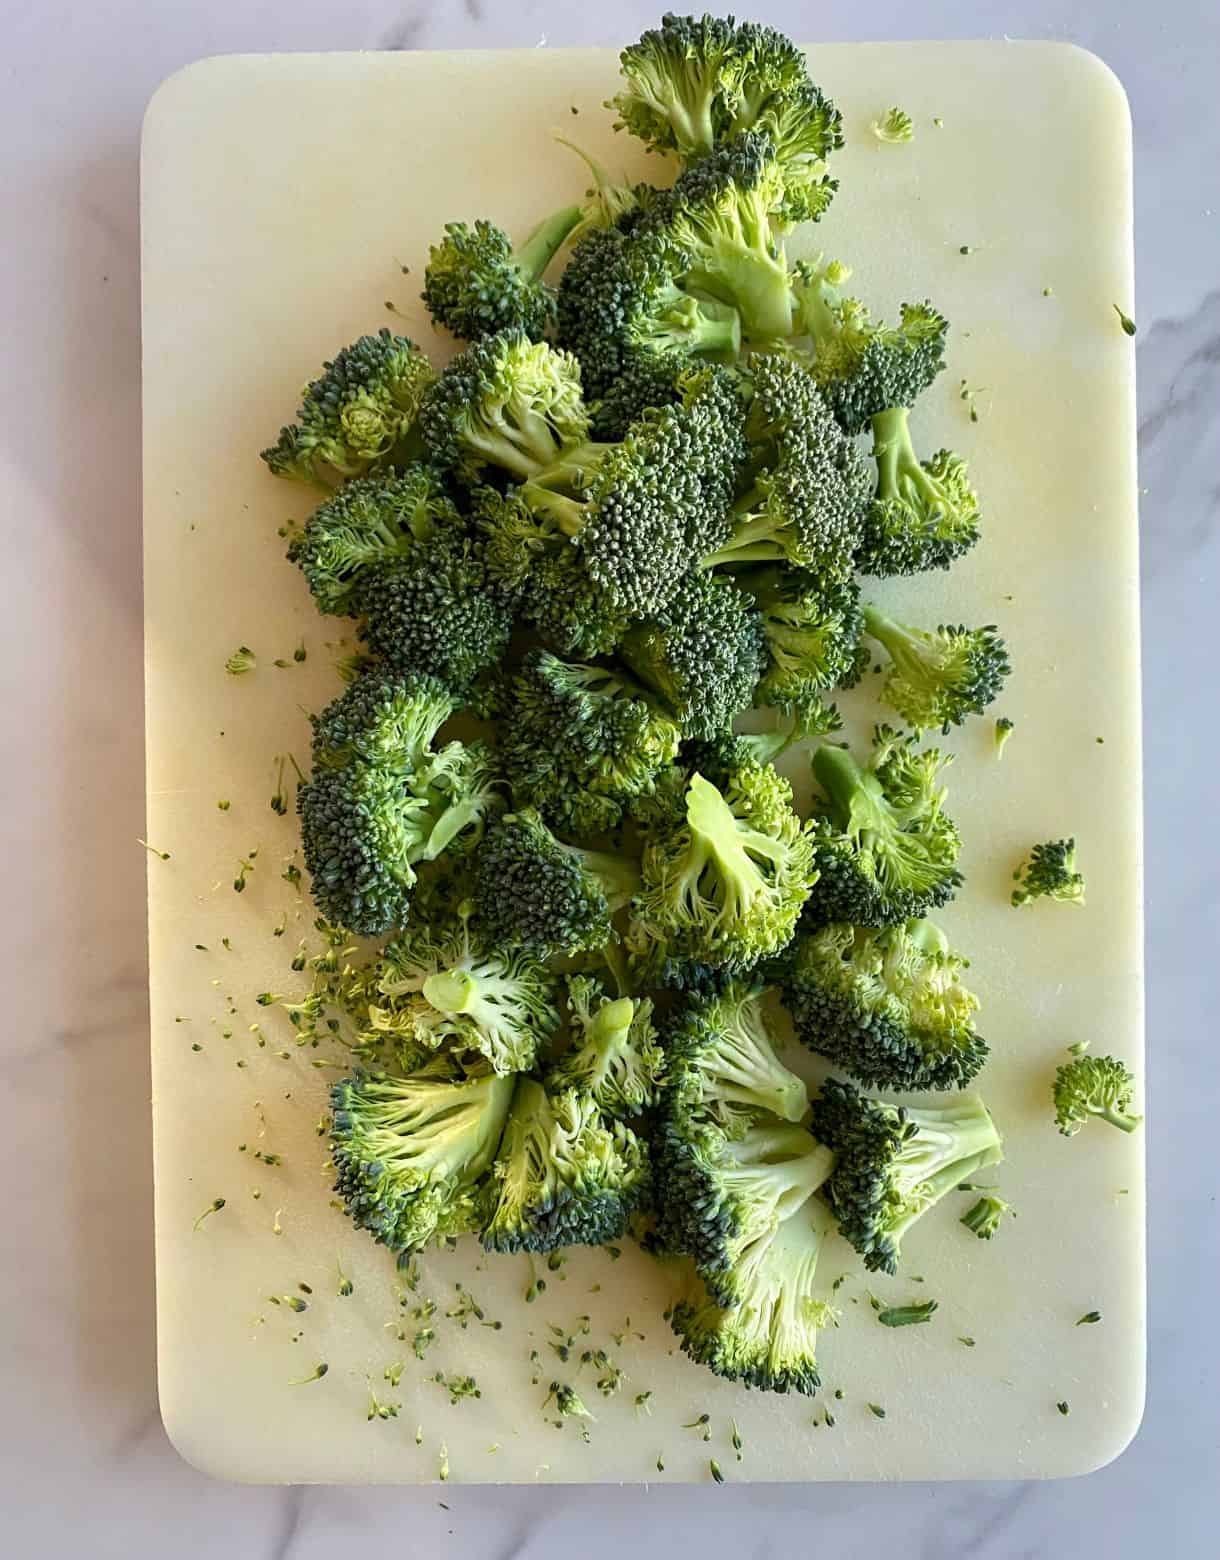 A cutting board with raw broccoli chopped into florets.